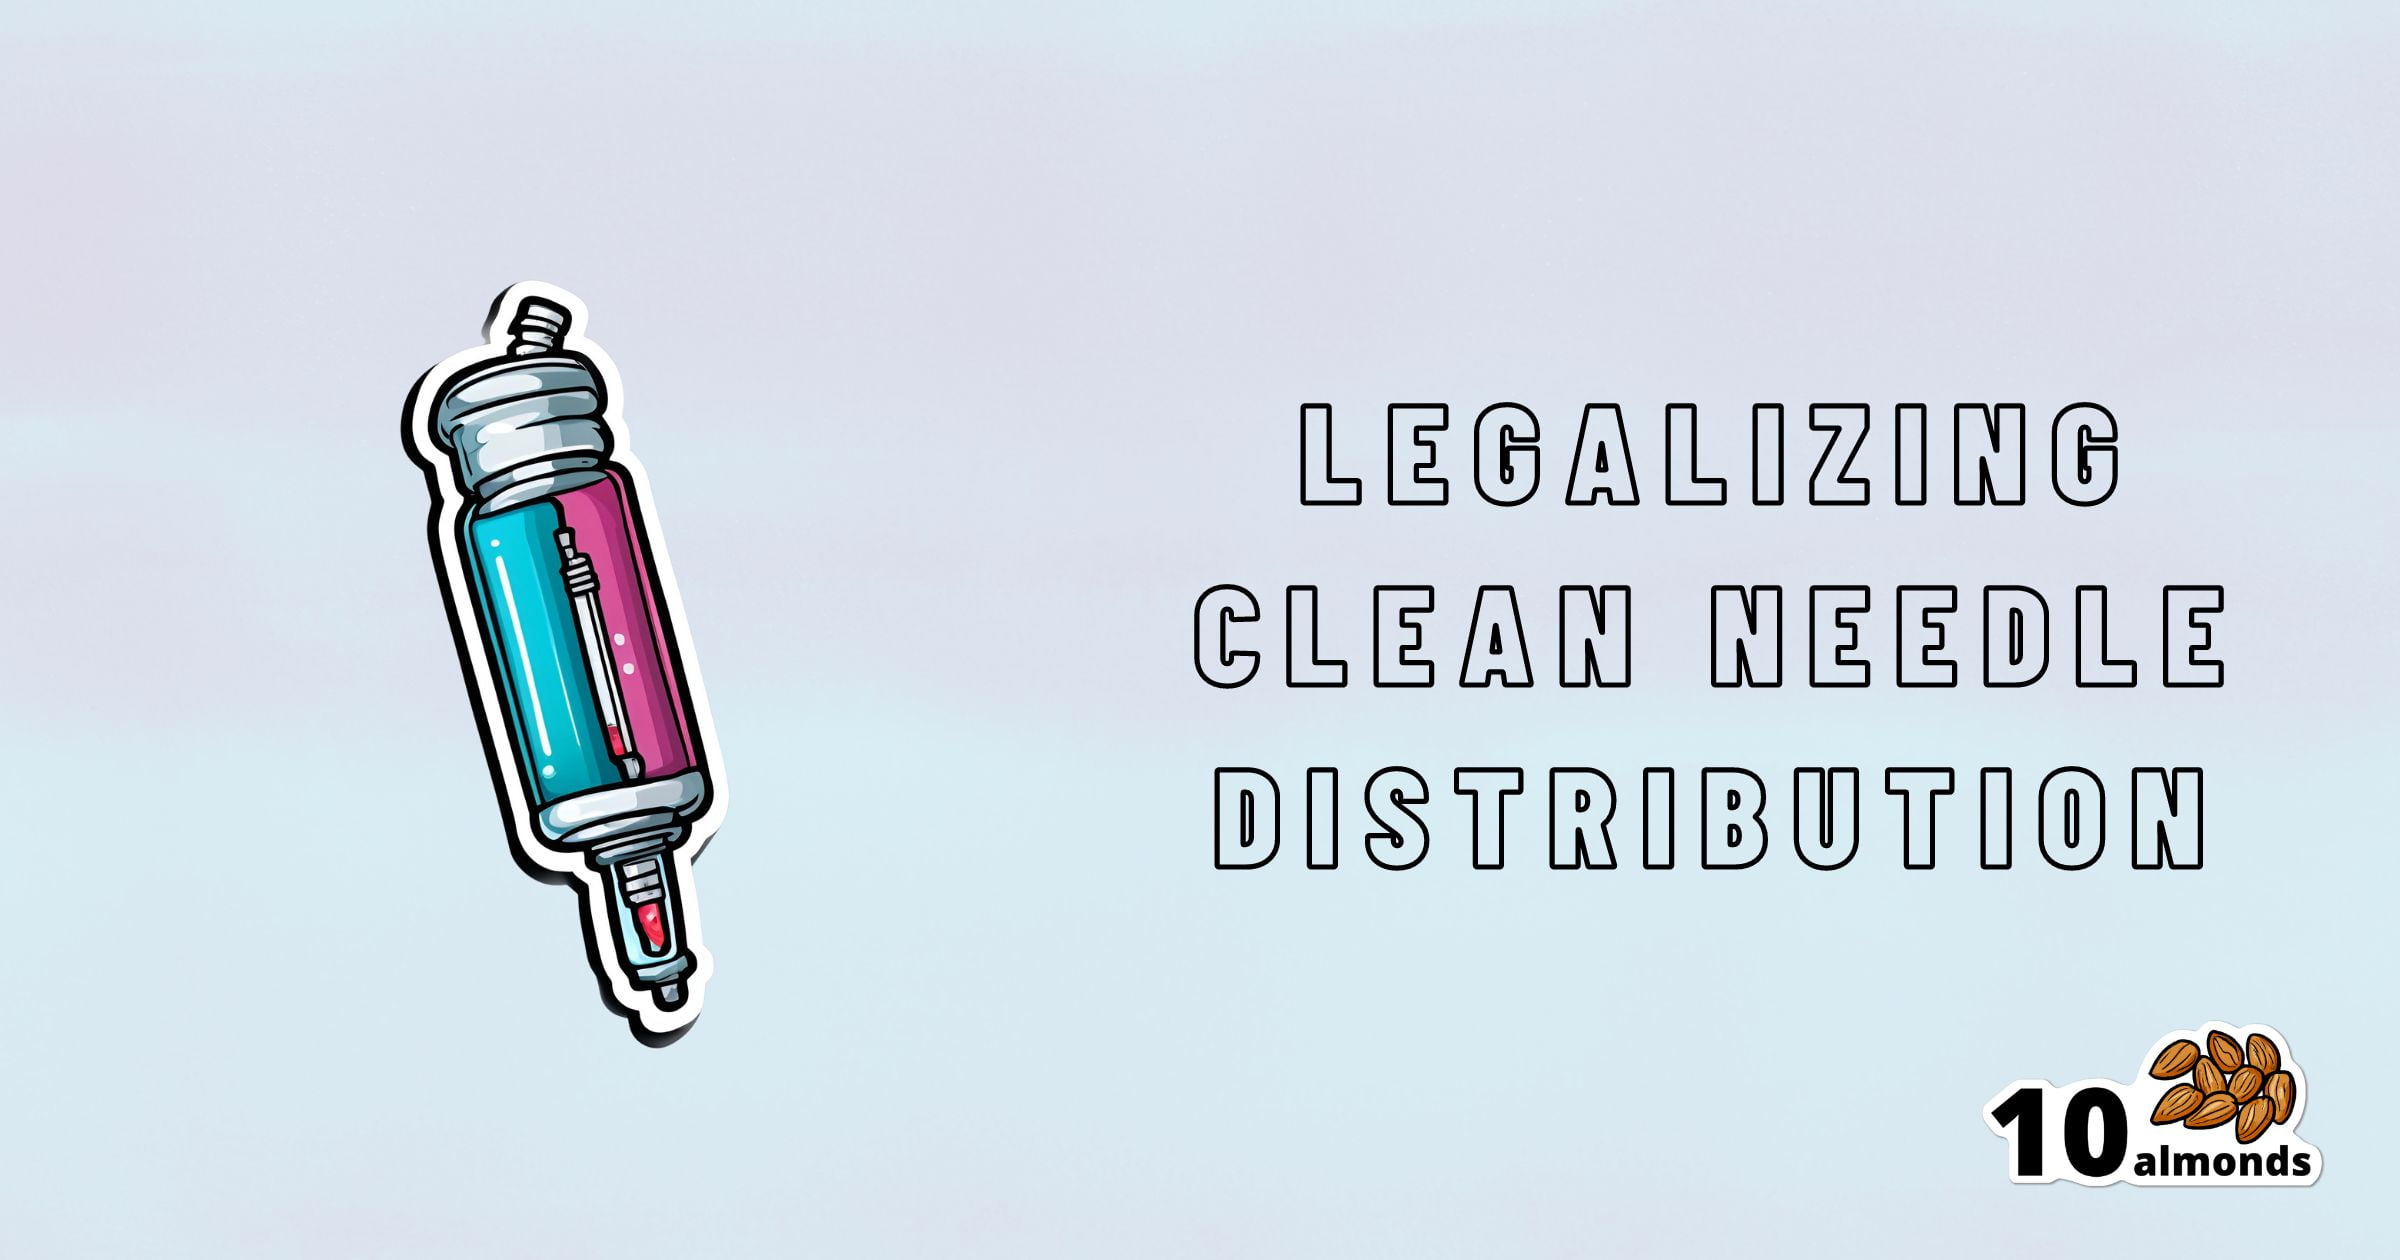 The image features a syringe graphic on the left with the text "LEGALIZING CLEAN NEEDLE DISTRIBUTION TO SAVE LIVES" on the right. The logo "10 almonds" with an icon of ten almonds is at the bottom right corner. The background is a gradient of light blue and white.